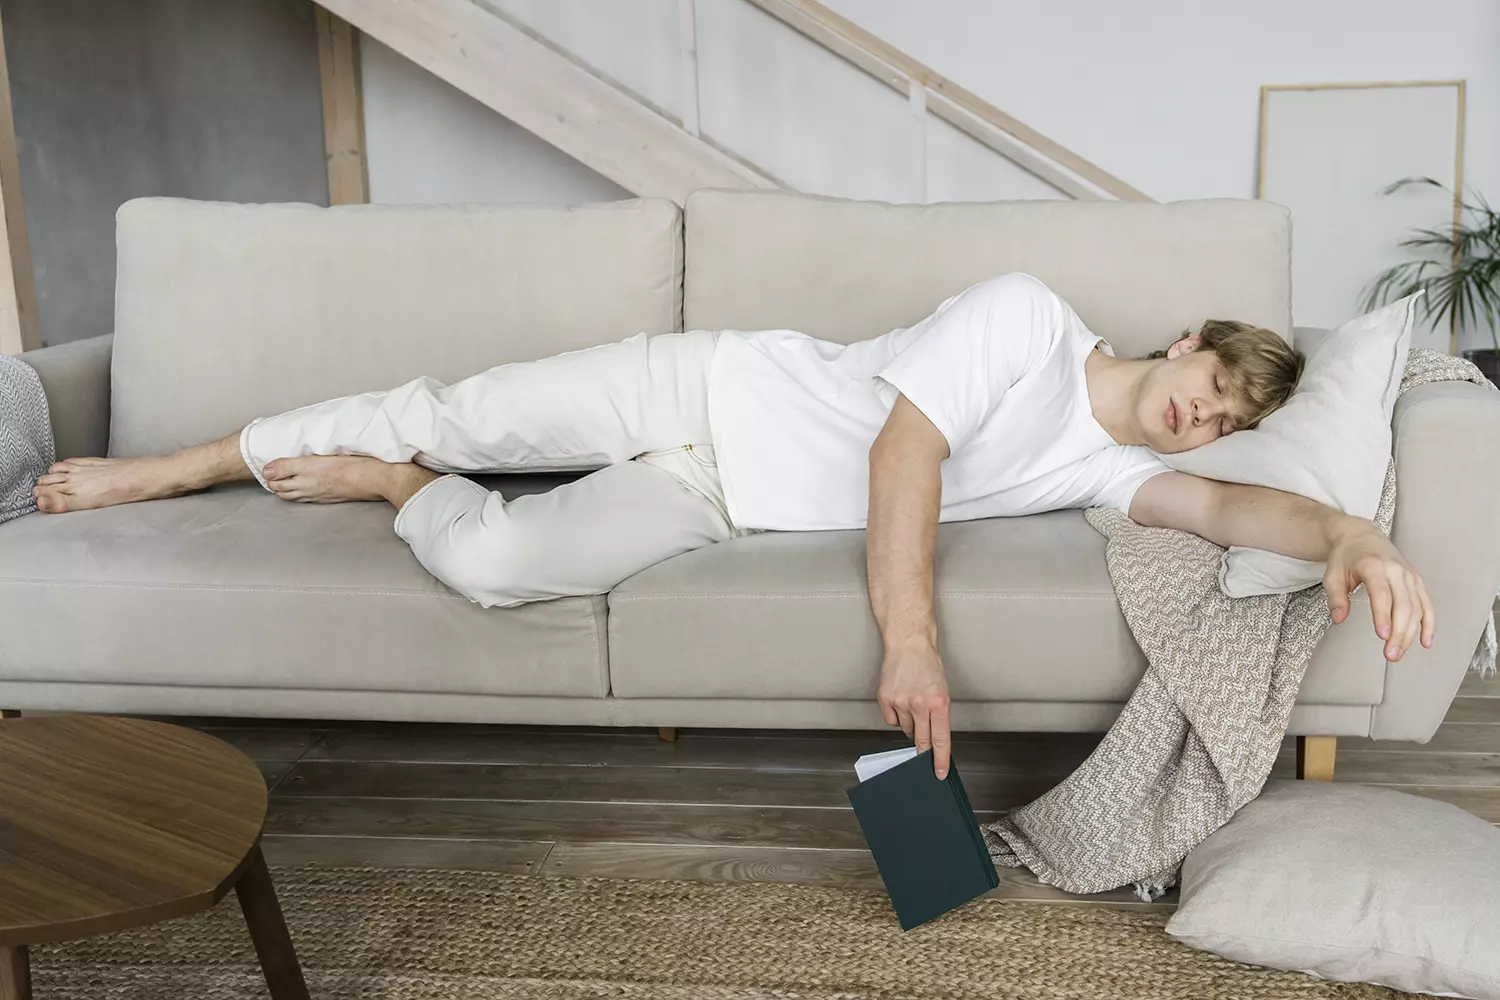 Is a Nap the Cure for a Bad Night's Sleep?